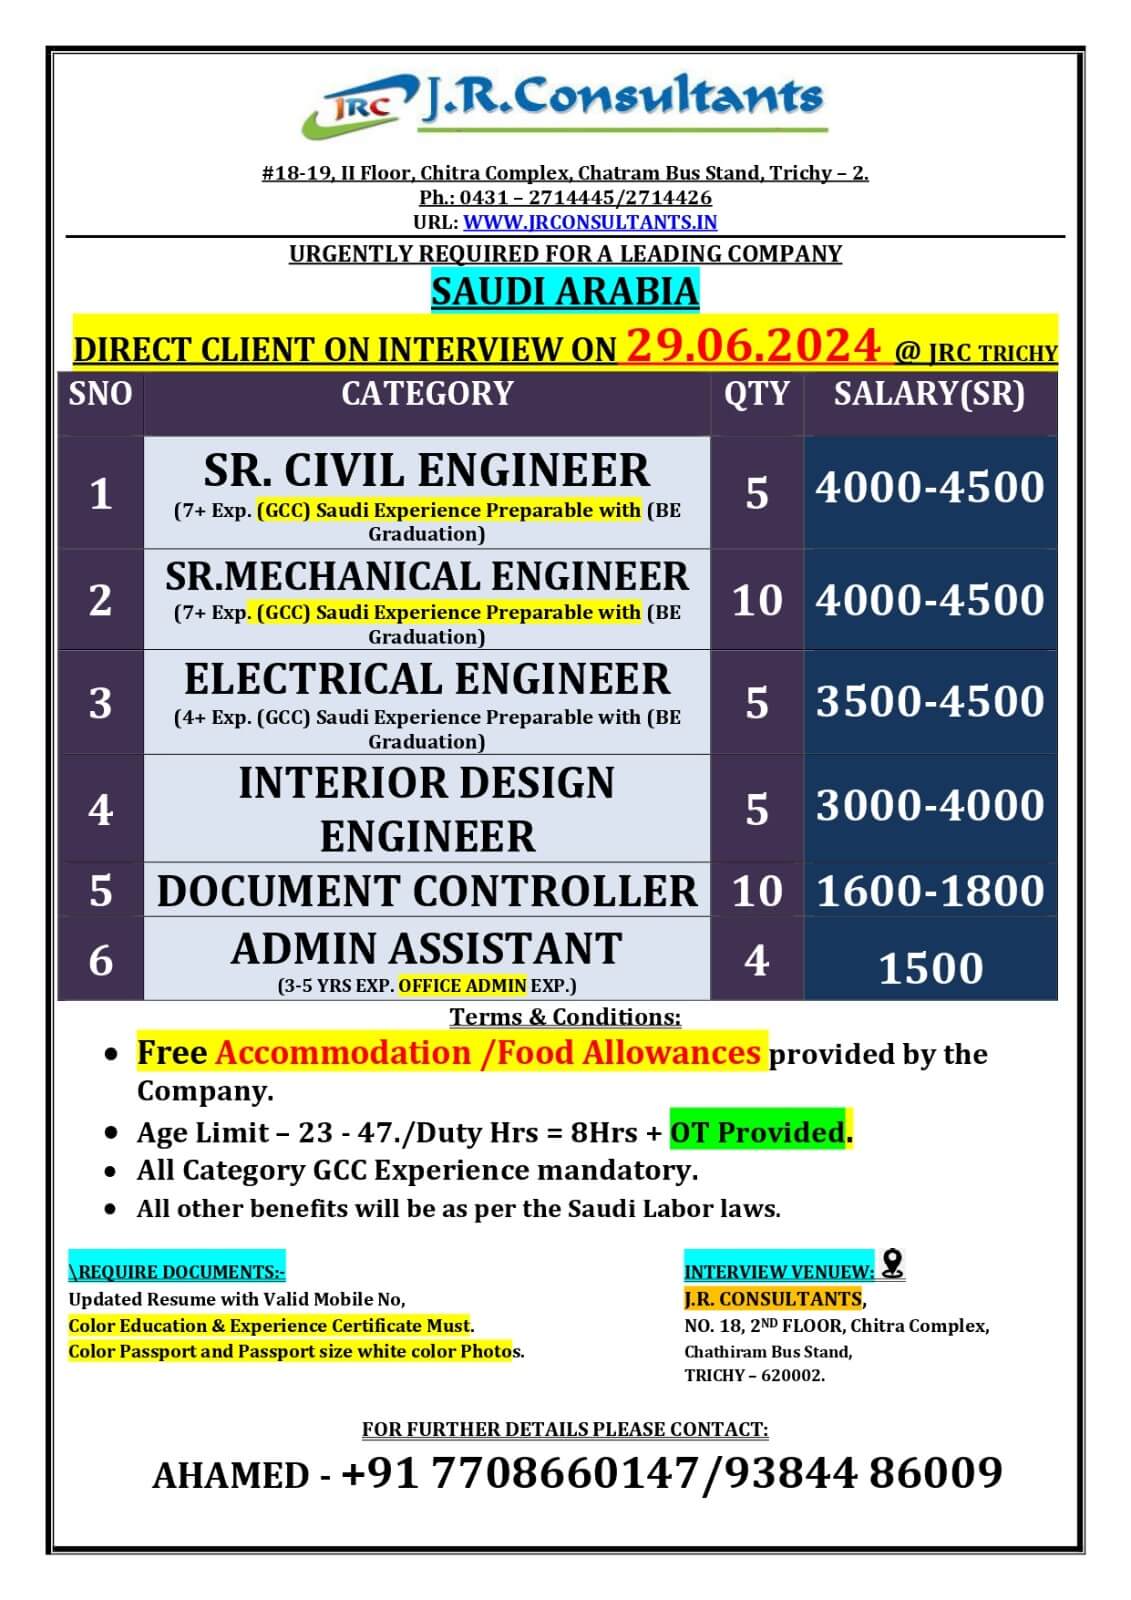 URGENTLY REQUIRED FOR A LEADING COMPANY IN SAUDI ARABIA DIRECT CLIENT INTERVIEW ON 29.06.2024 @ JRC TRICHY